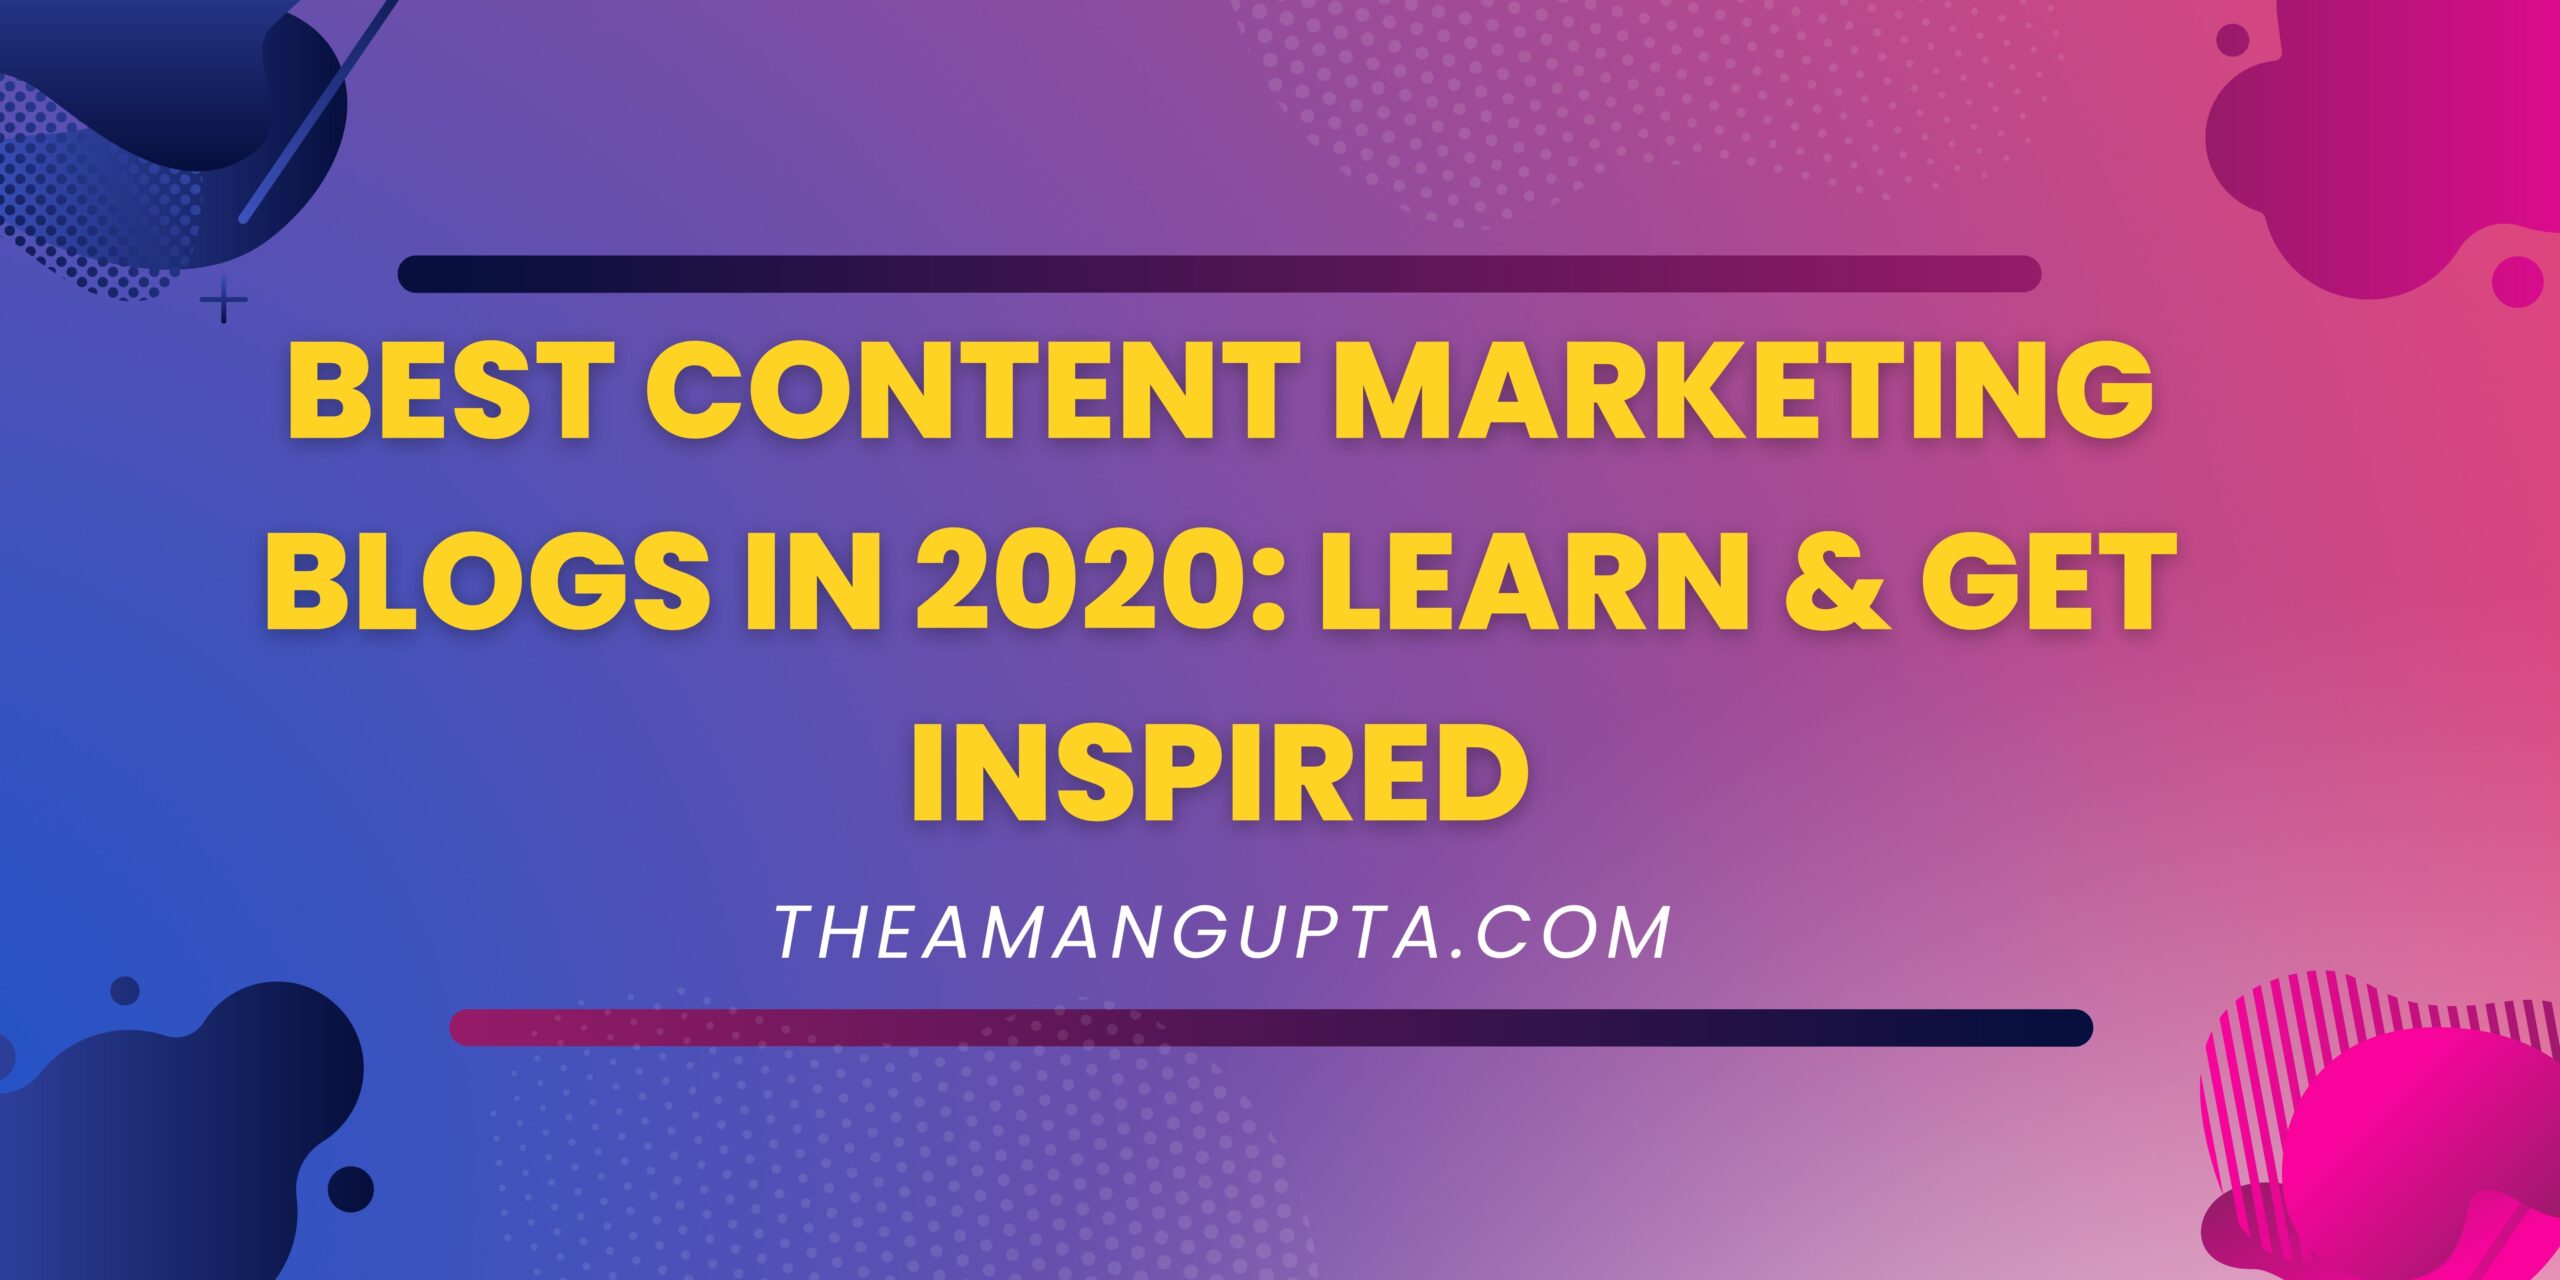 Best Content Marketing Blogs in 2020: Learn & Get Inspired|Content Marketing|Theamangupta|Theamangupta